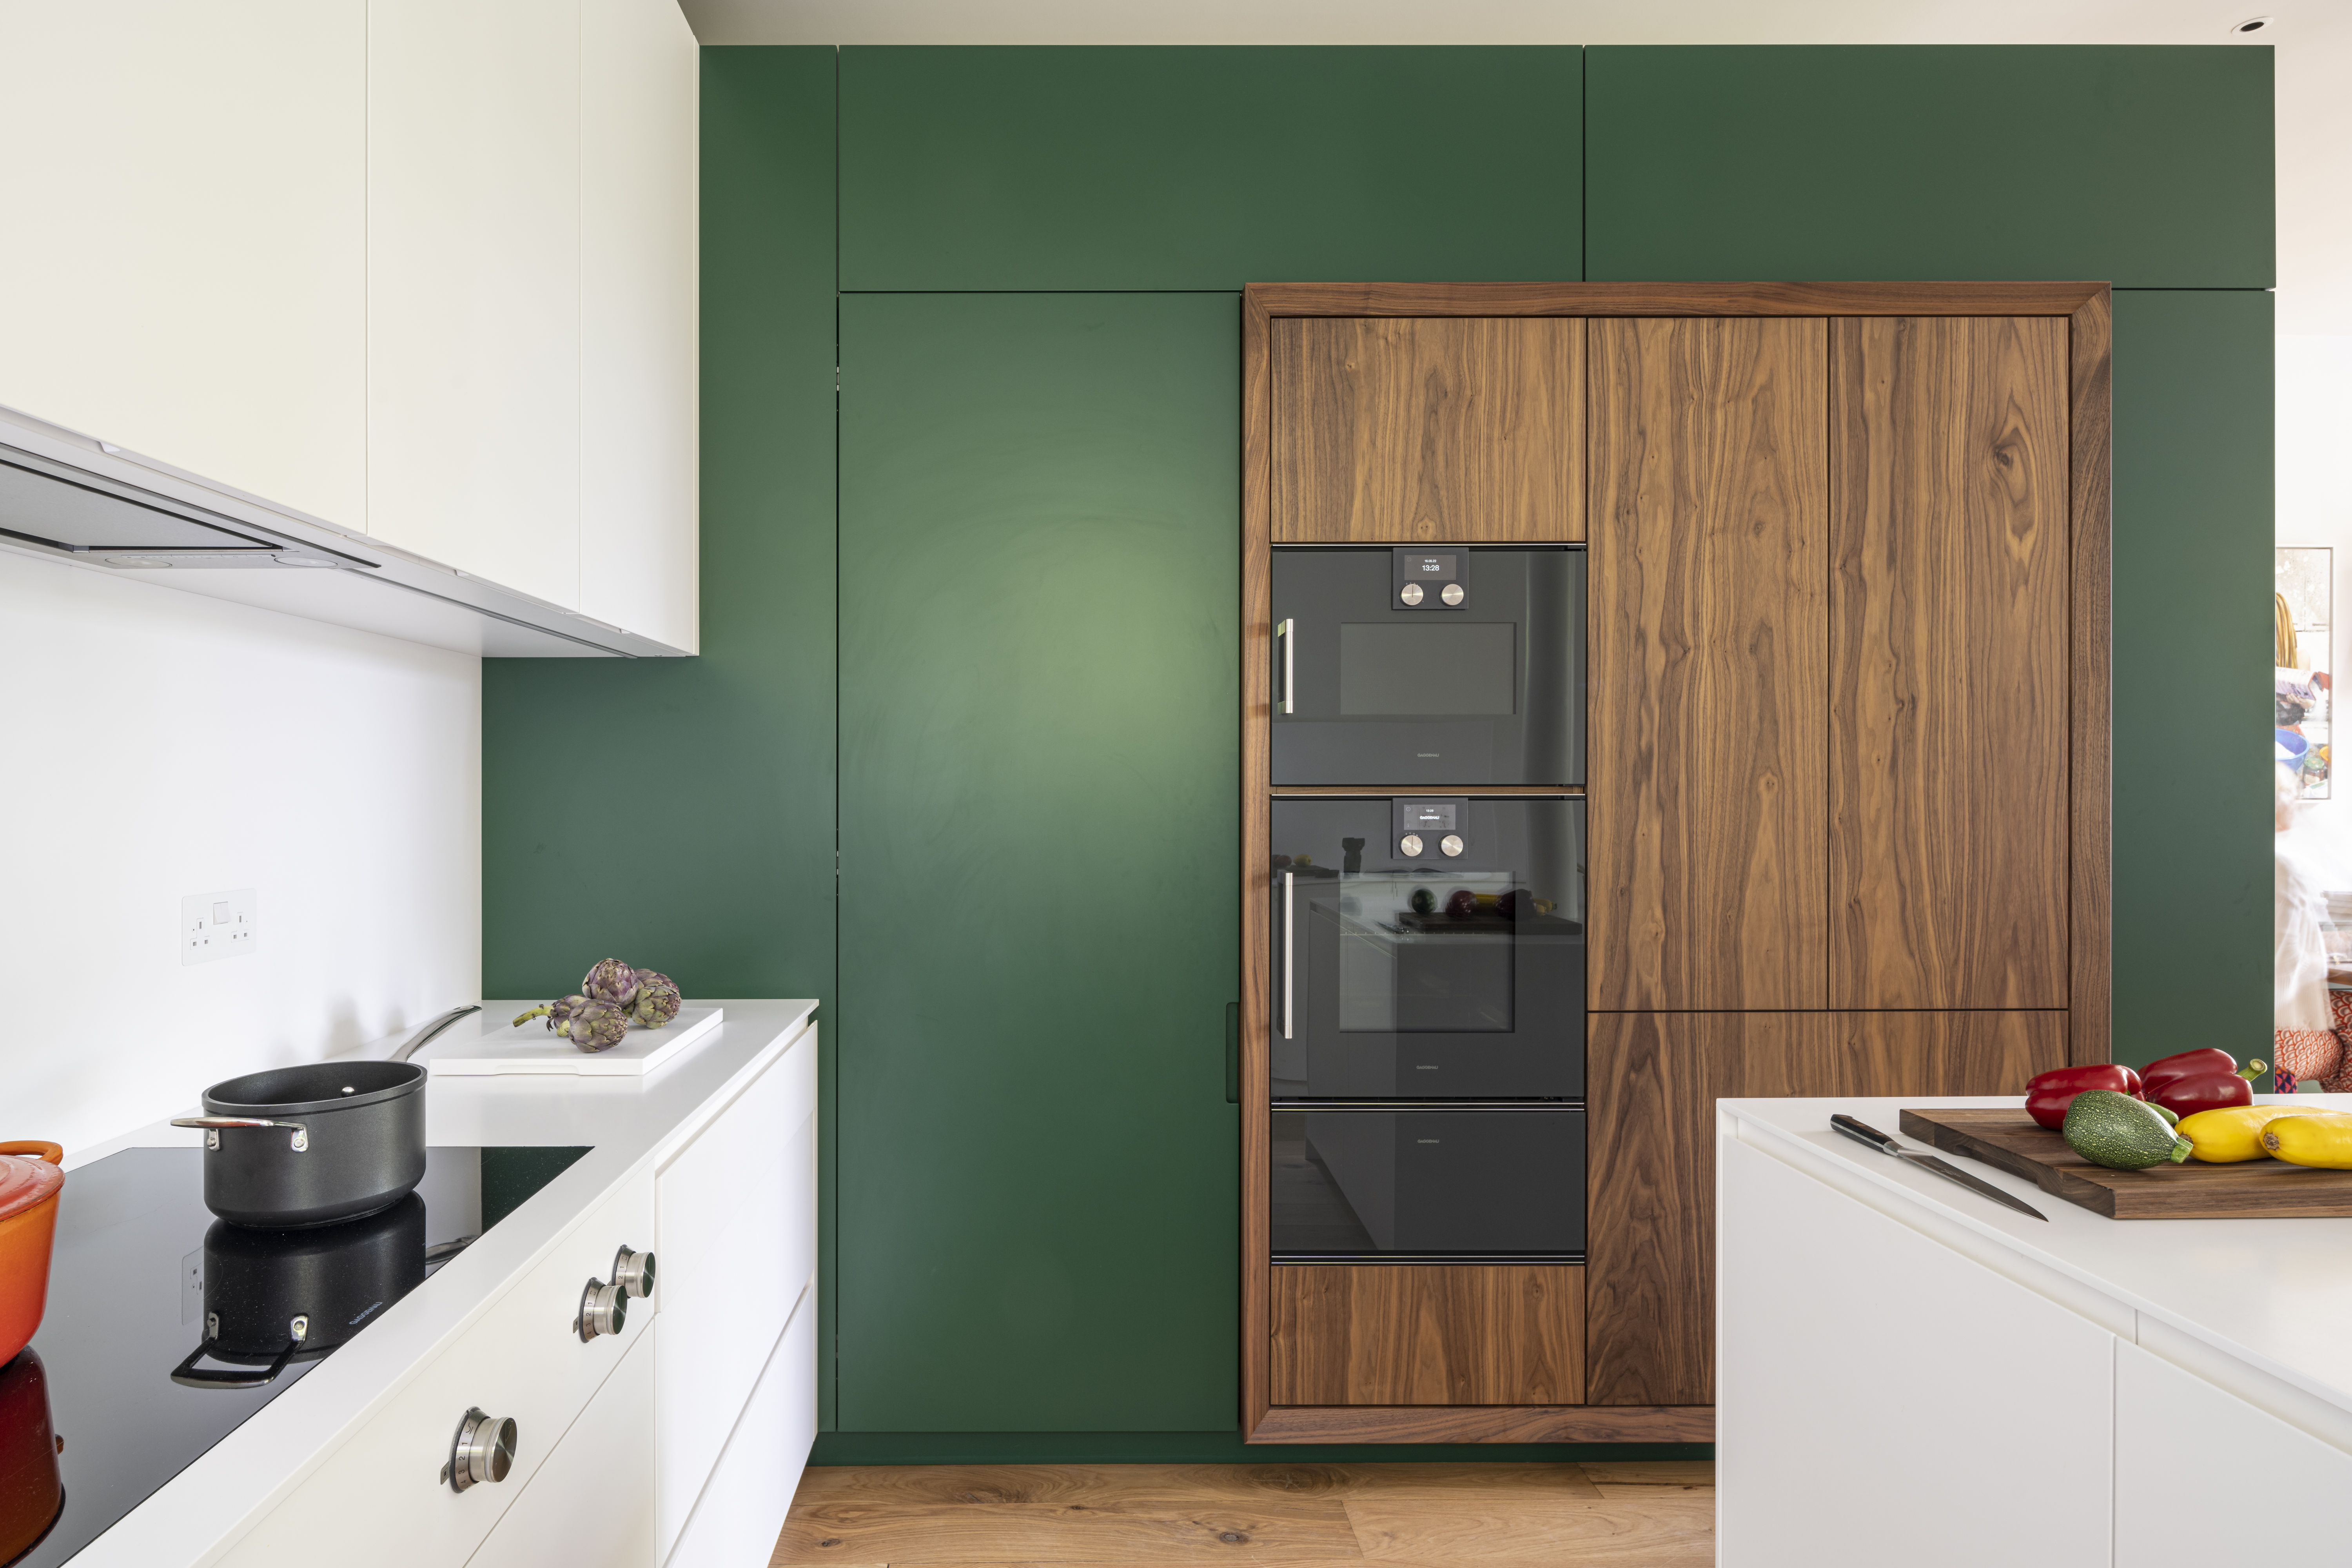 Oven and fridge section with walnut doors and frame